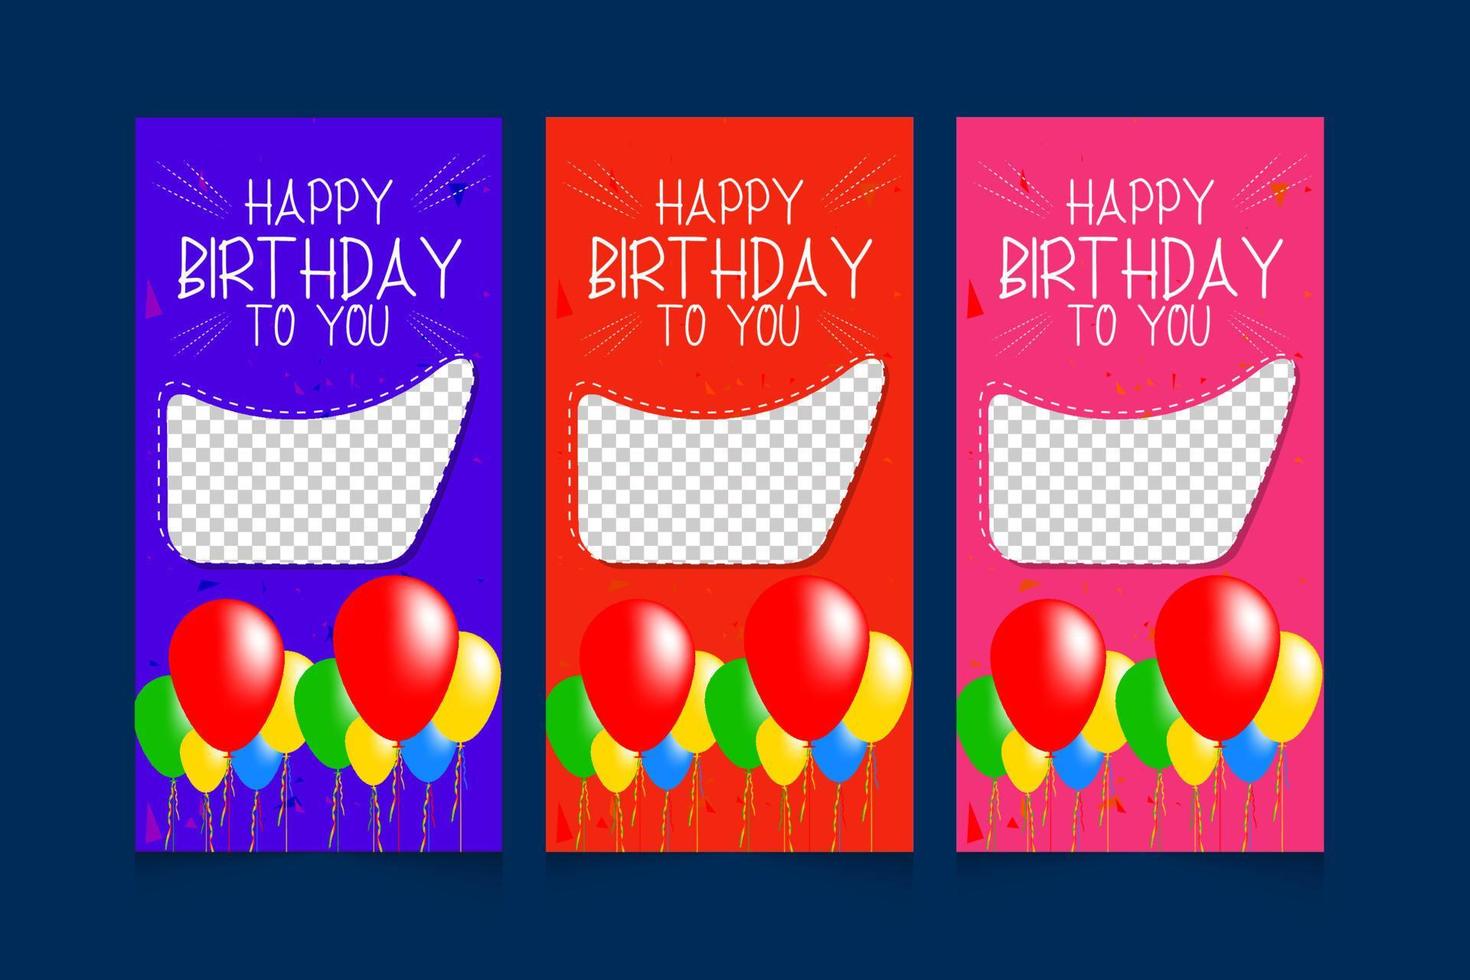 Happy birthday celebration with realistic balloons and ribbon vertical banner design vector